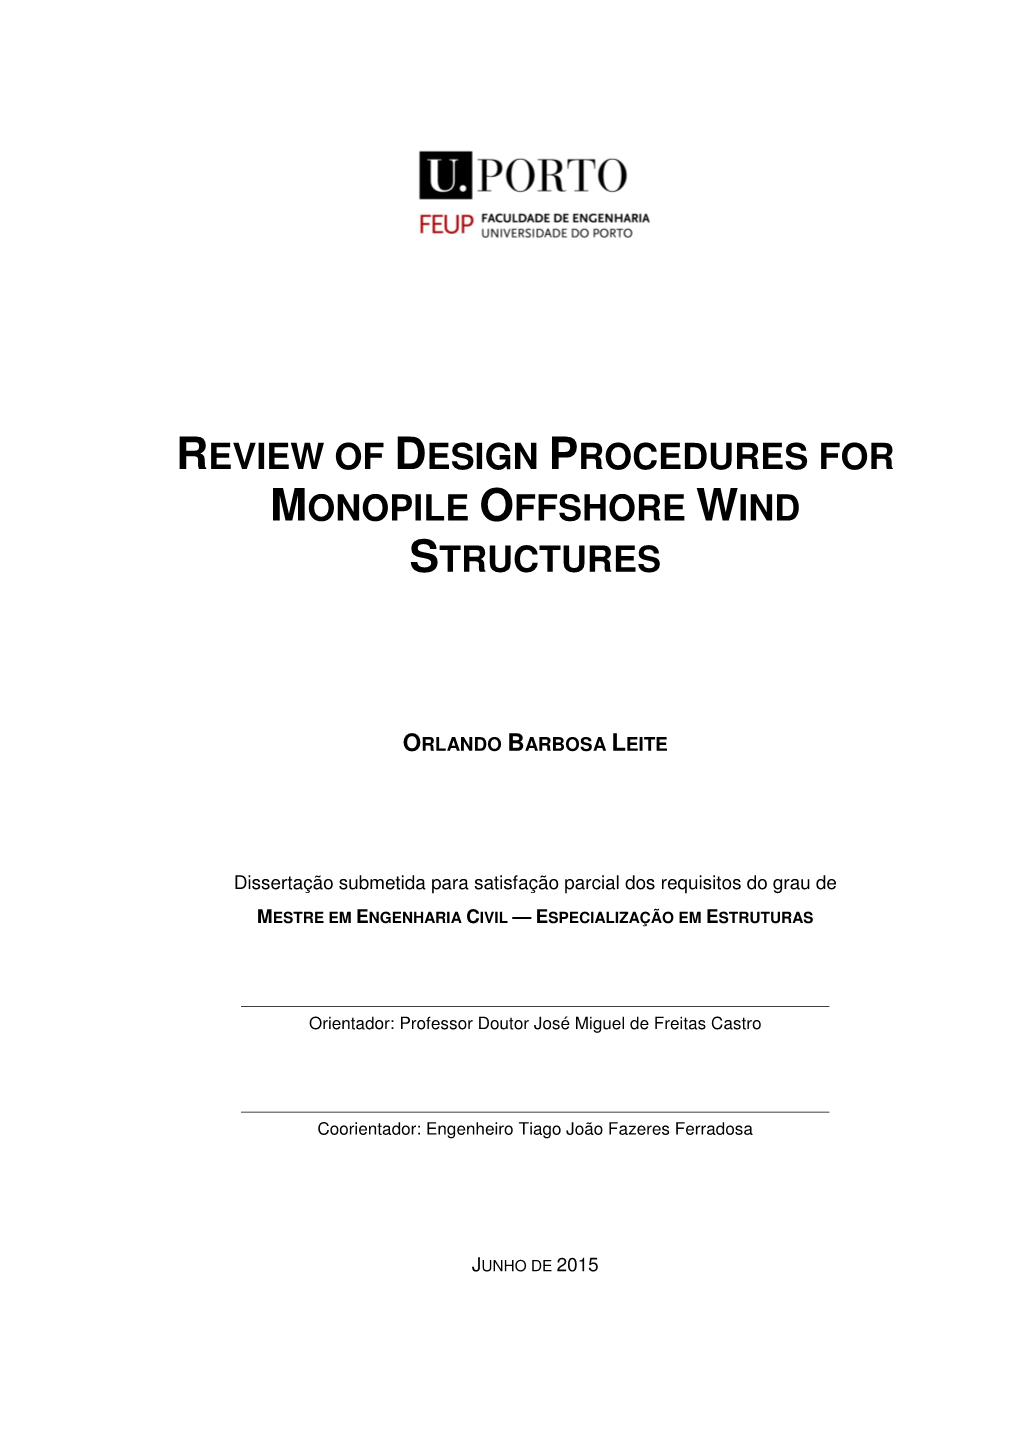 Review of Design Procedures for Monopile Offshore Wind Structures